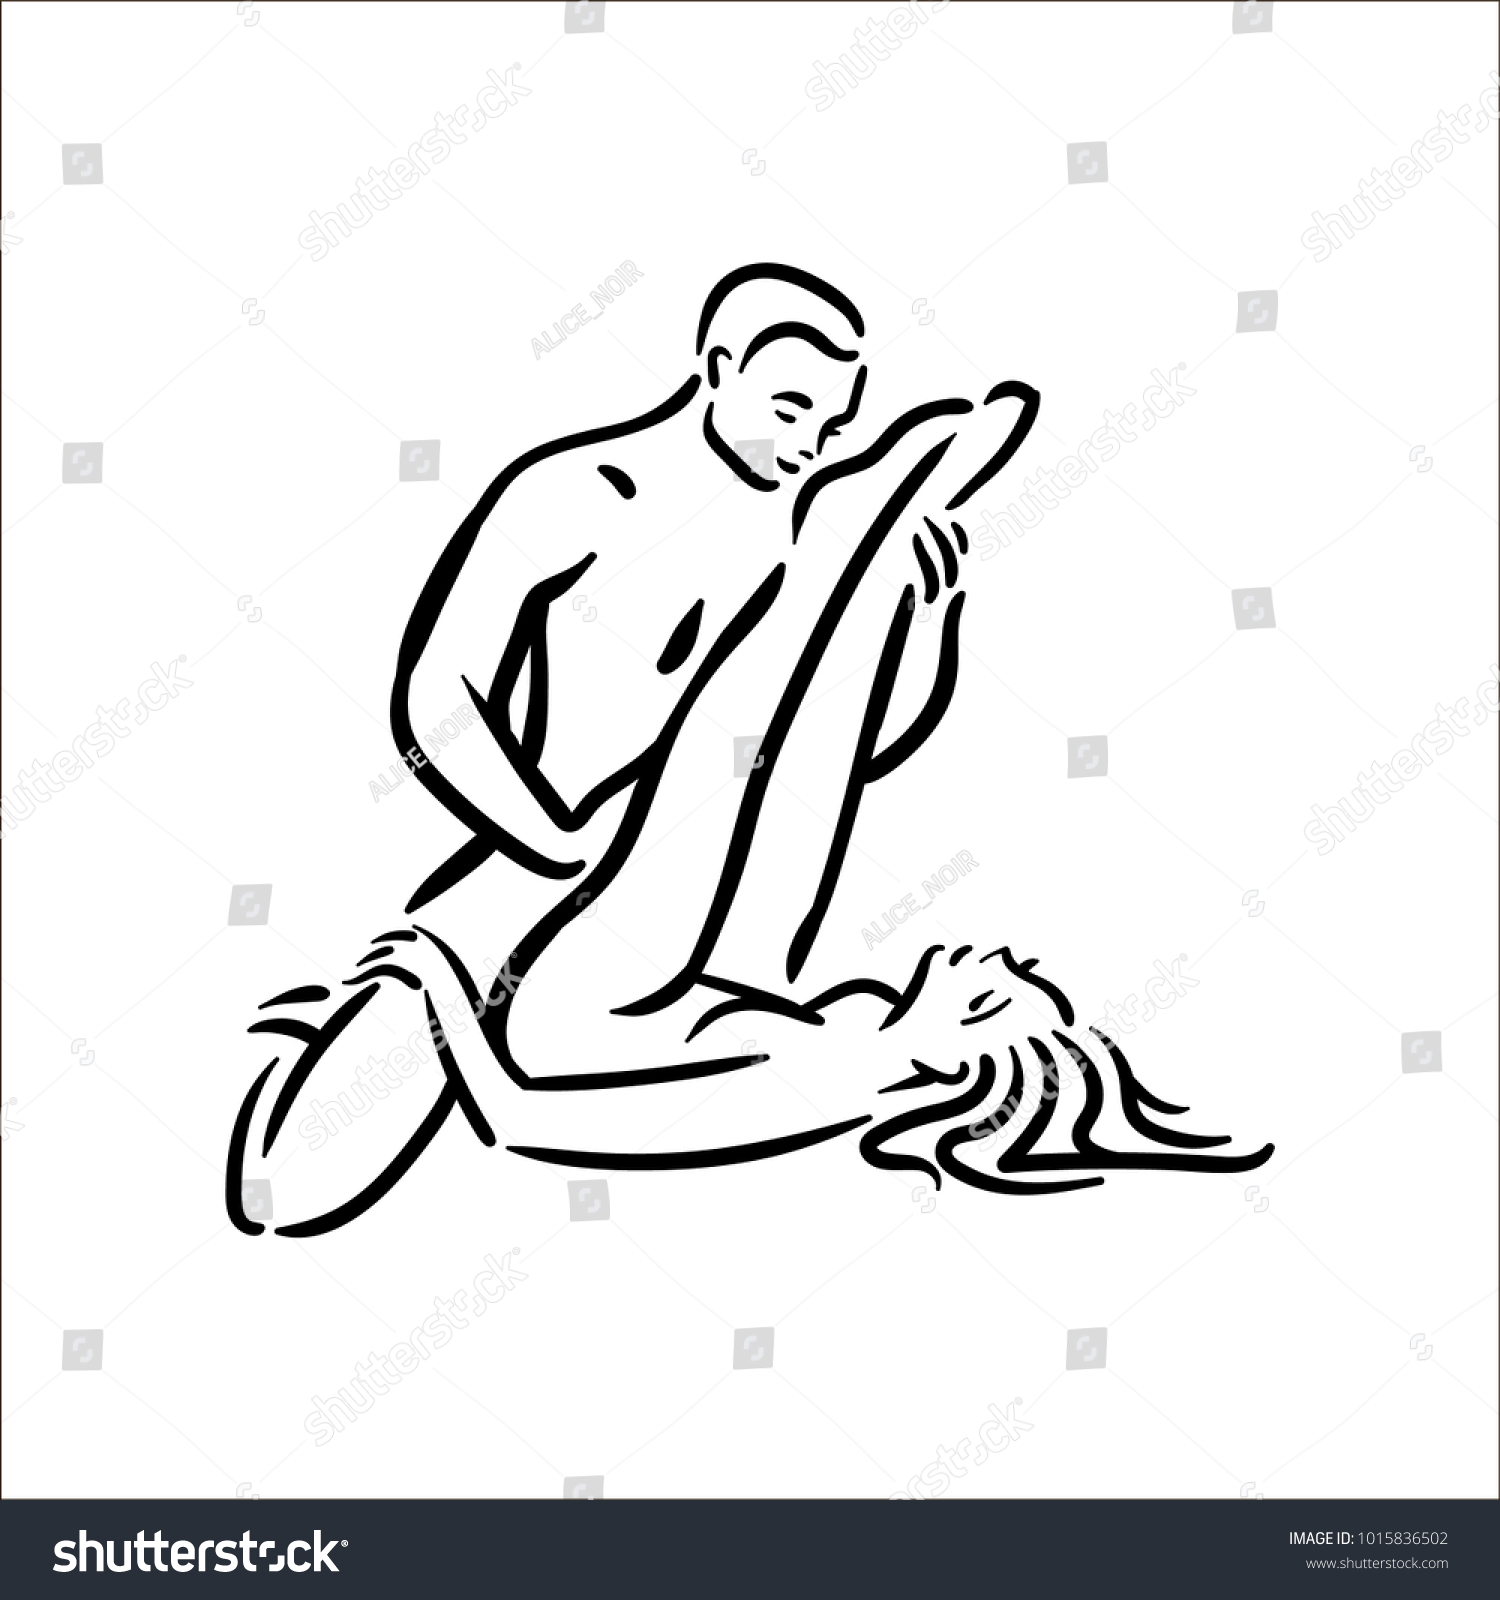 stock-vector-kama-sutra-sexual-pose-sex-poses-illustration-of-man-and-woman-on-white-background-